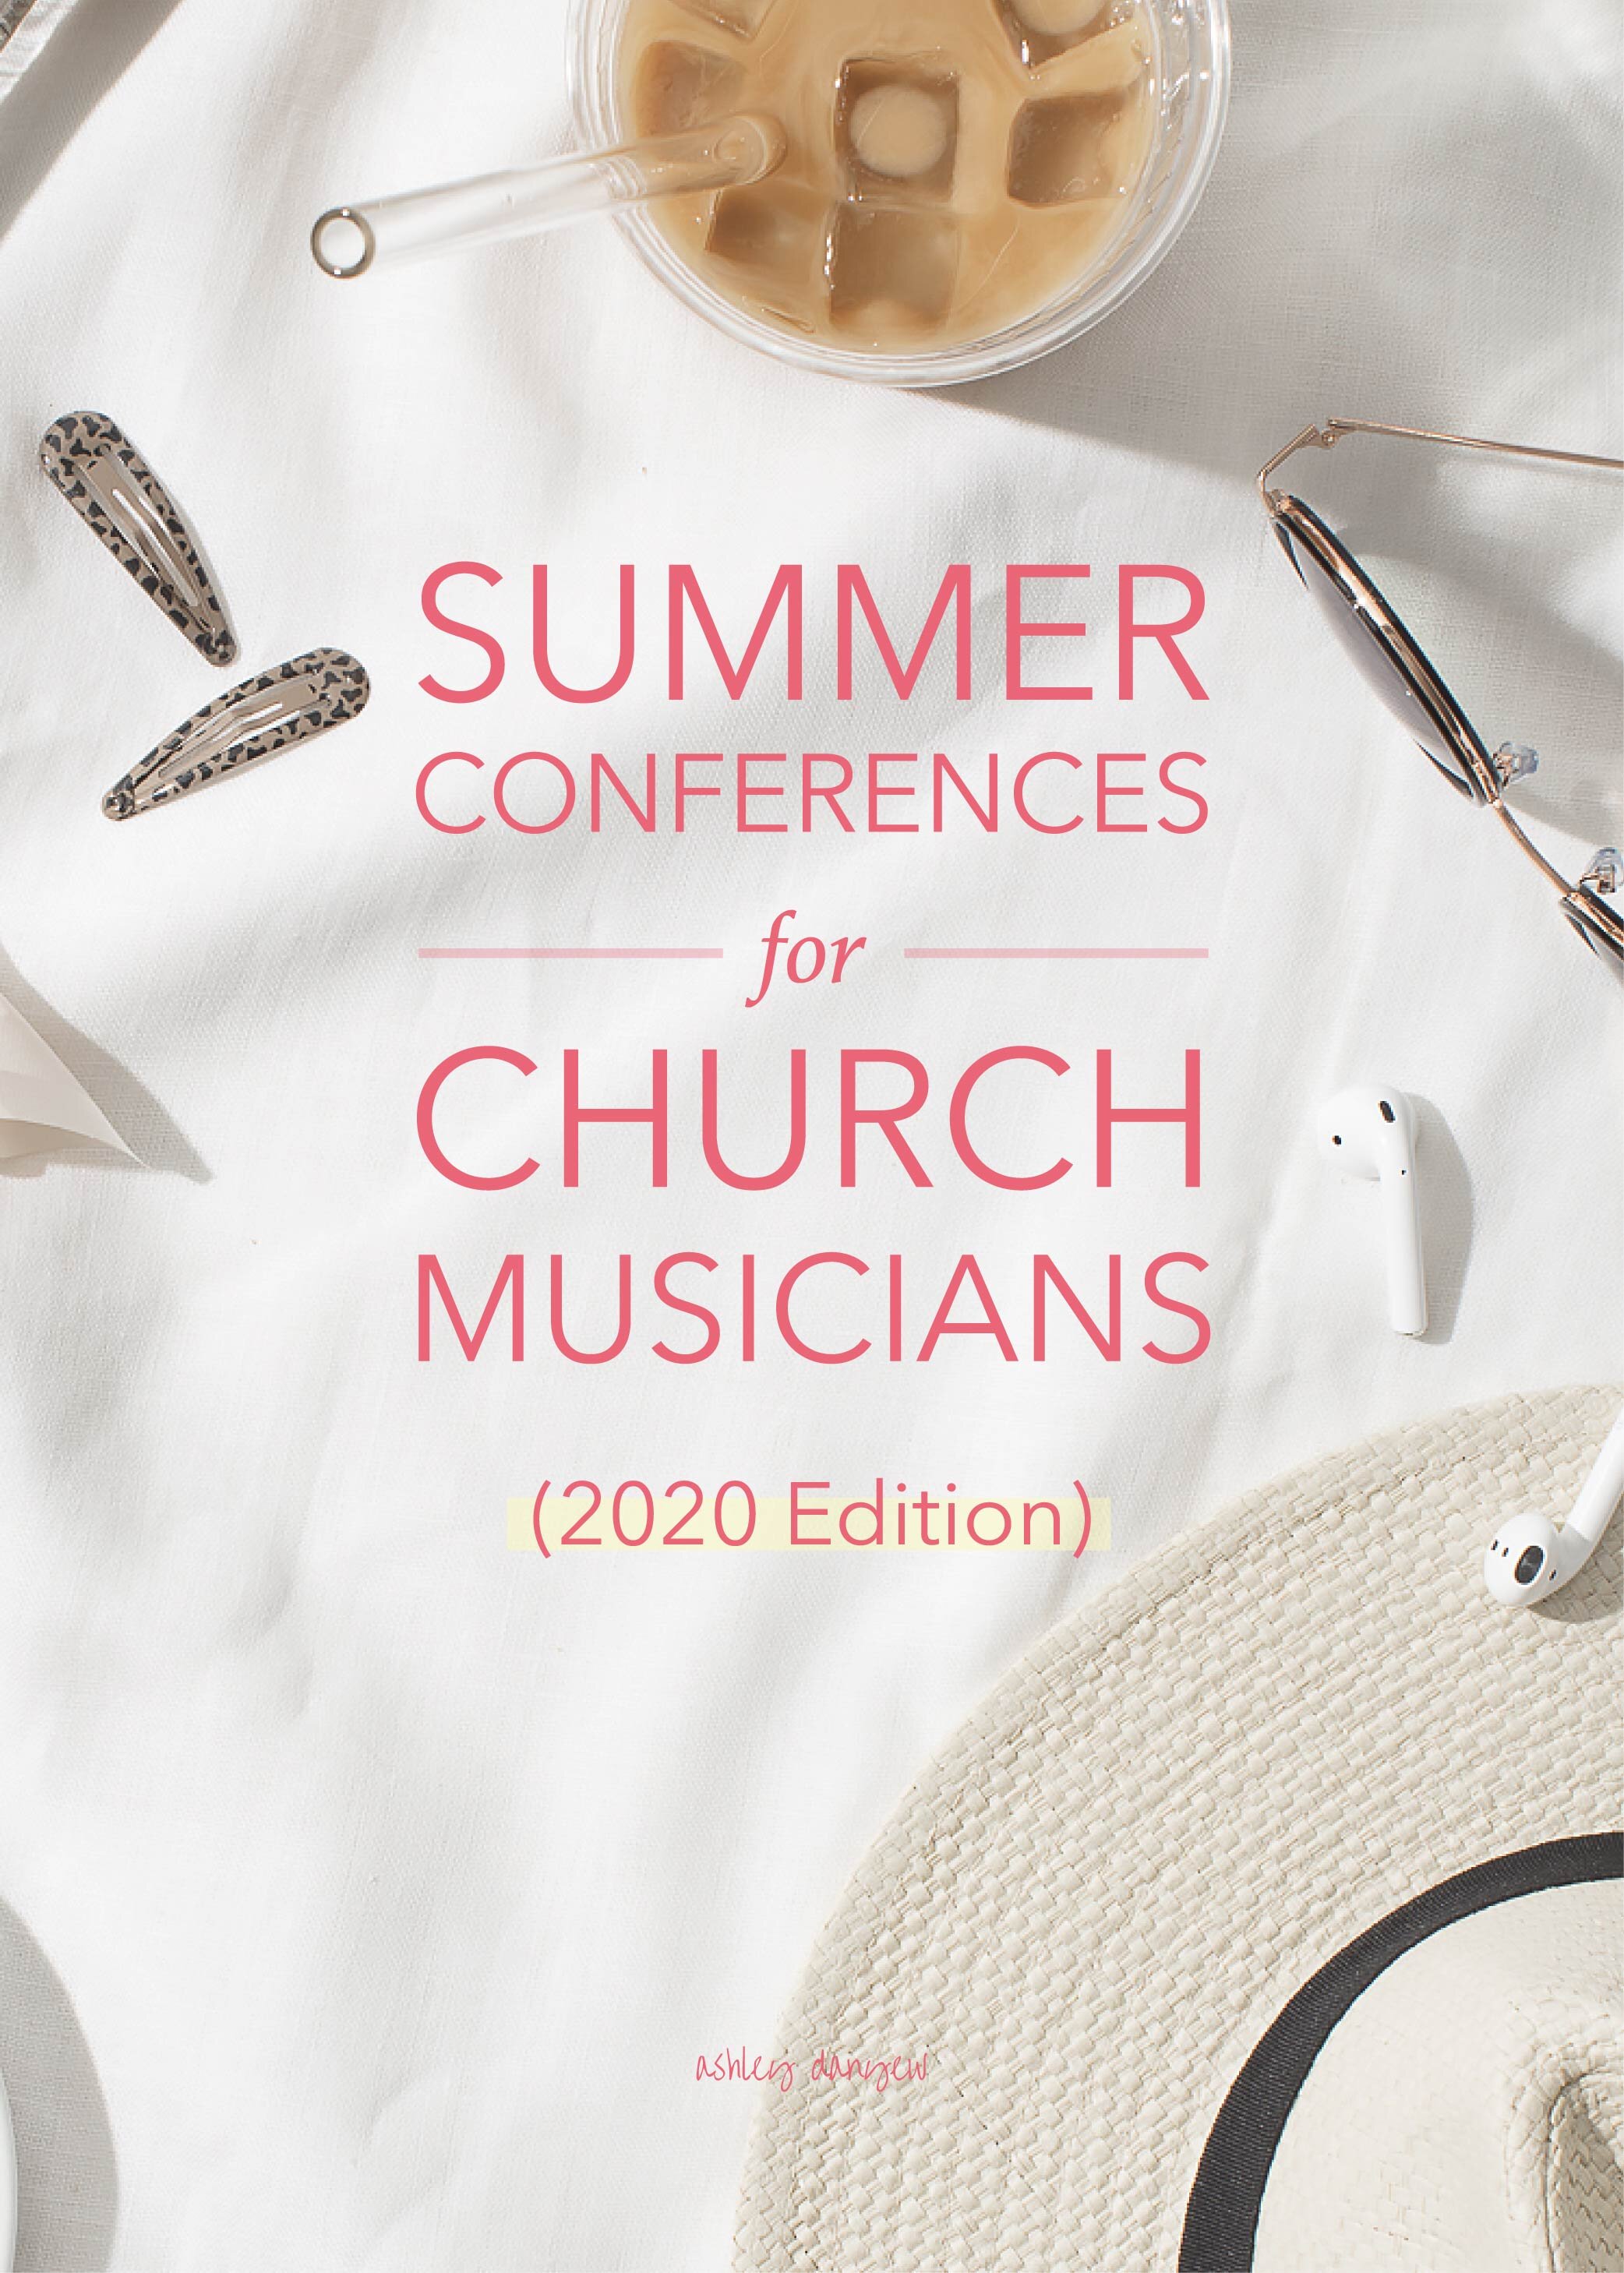 Summer Conferences for Church Musicians (2020 Edition)